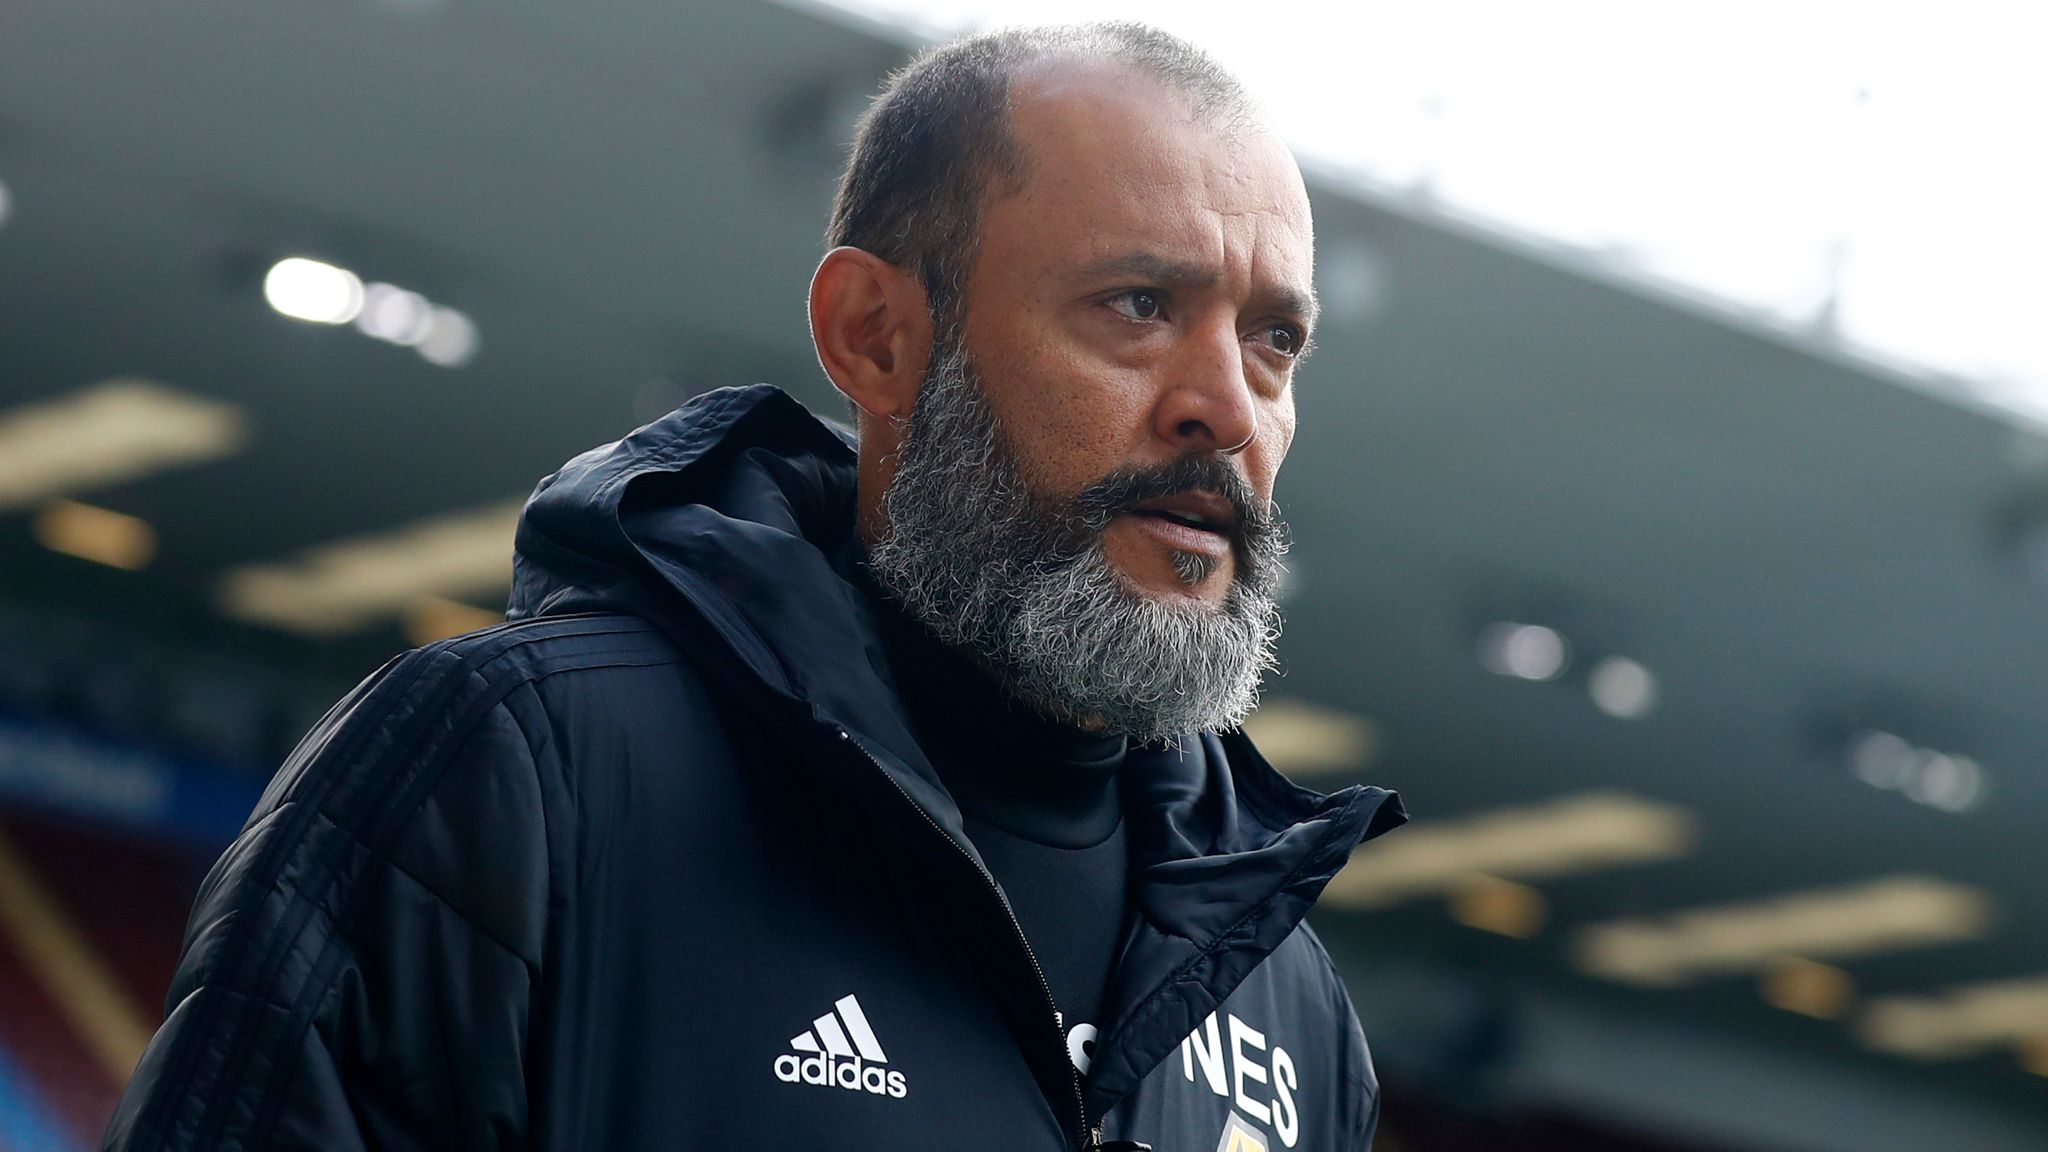 Nuno of Portugal is now the coach of Tottenham